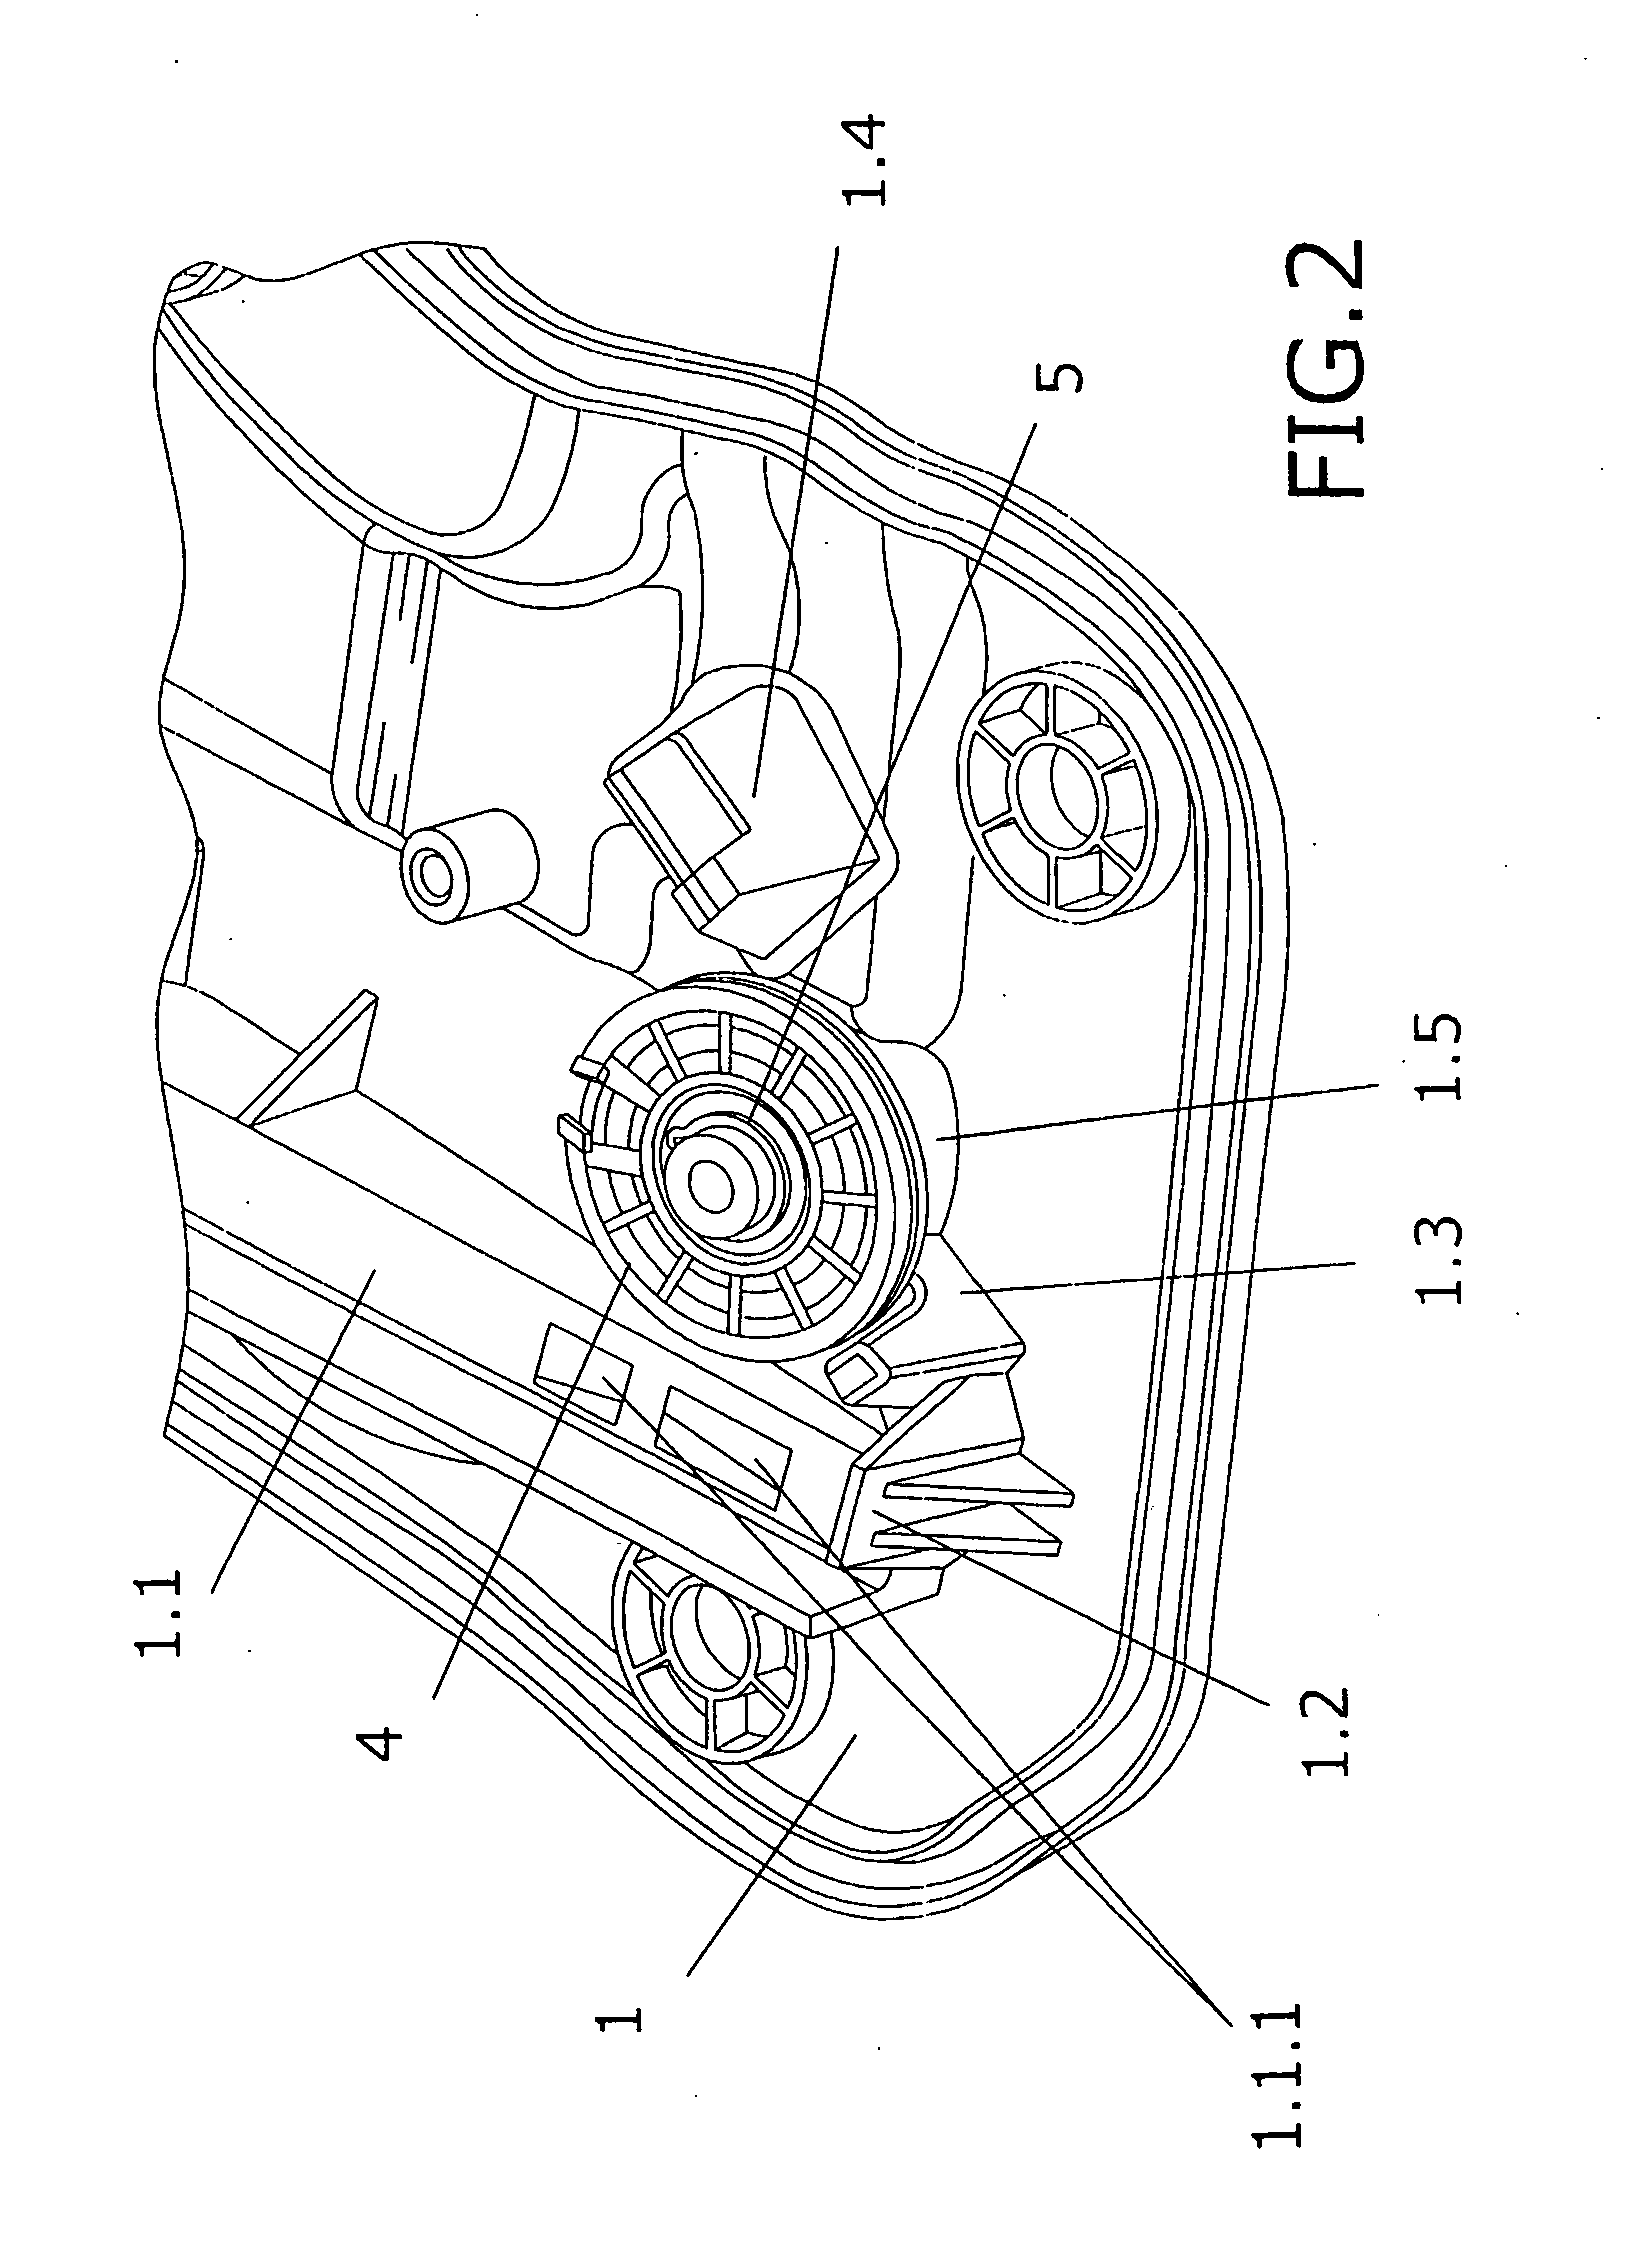 Structural supporting module for vehicle doors